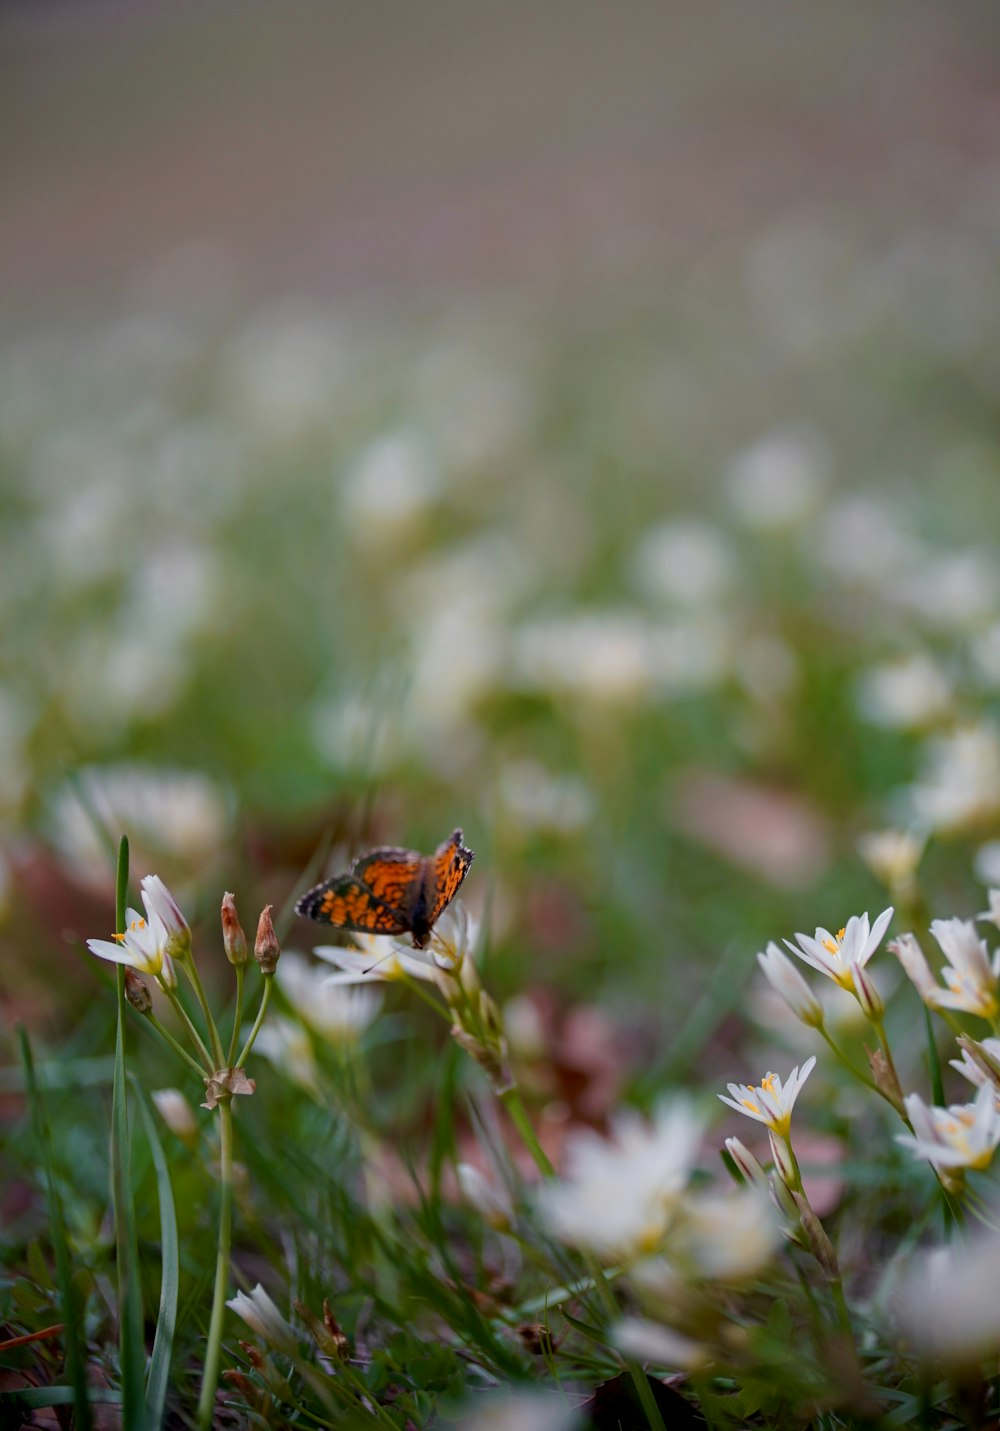 a small orange and black insect sitting on a flower